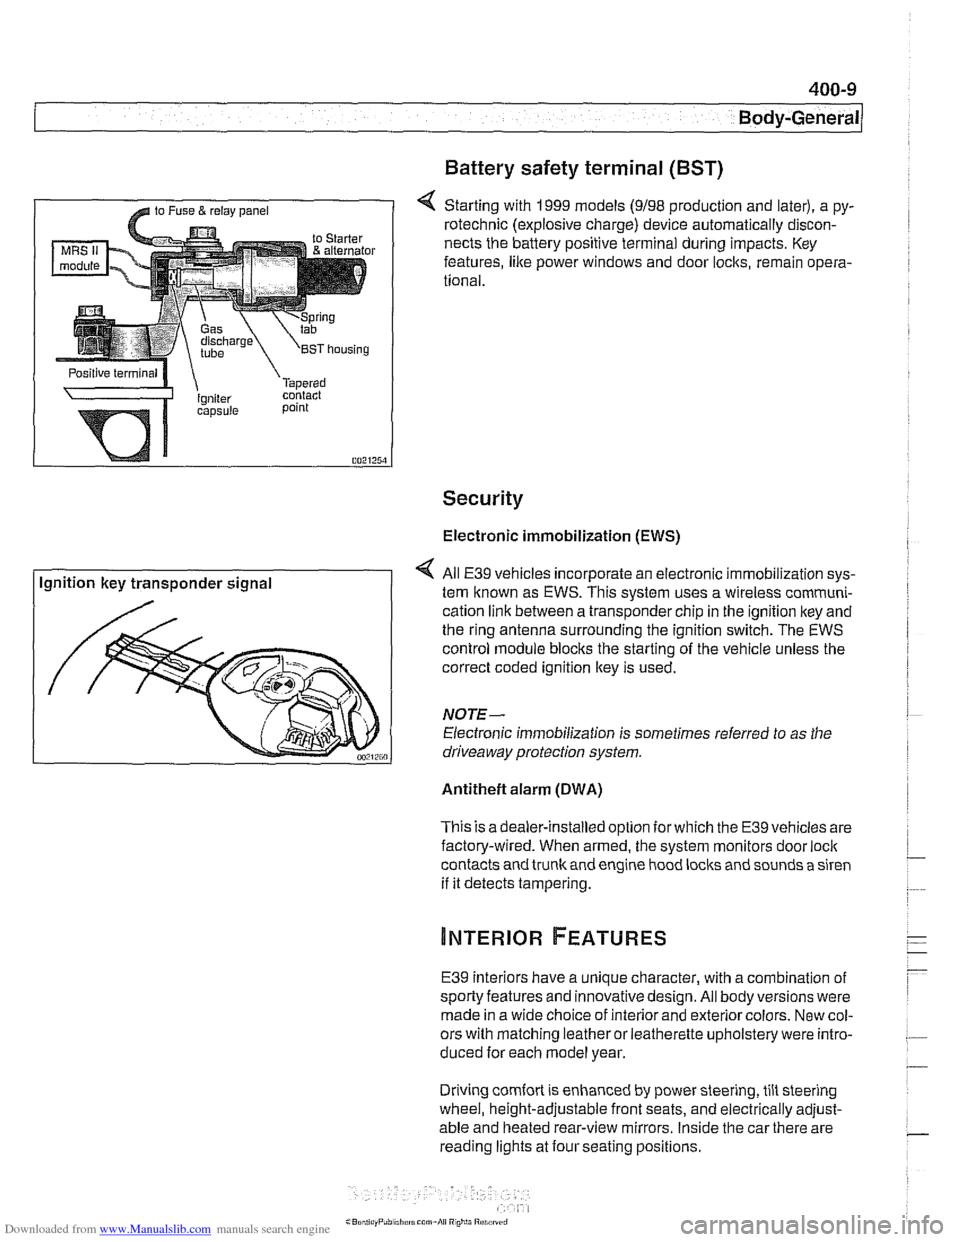 BMW 525i 1998 E39 Workshop Manual Downloaded from www.Manualslib.com manuals search engine 
400-9 
Body-General 
Battery  safety terminal 
(BST) 
4 Starting  with 1999 models (9198 production  and later), a py- 
rotechnic  (explosive 